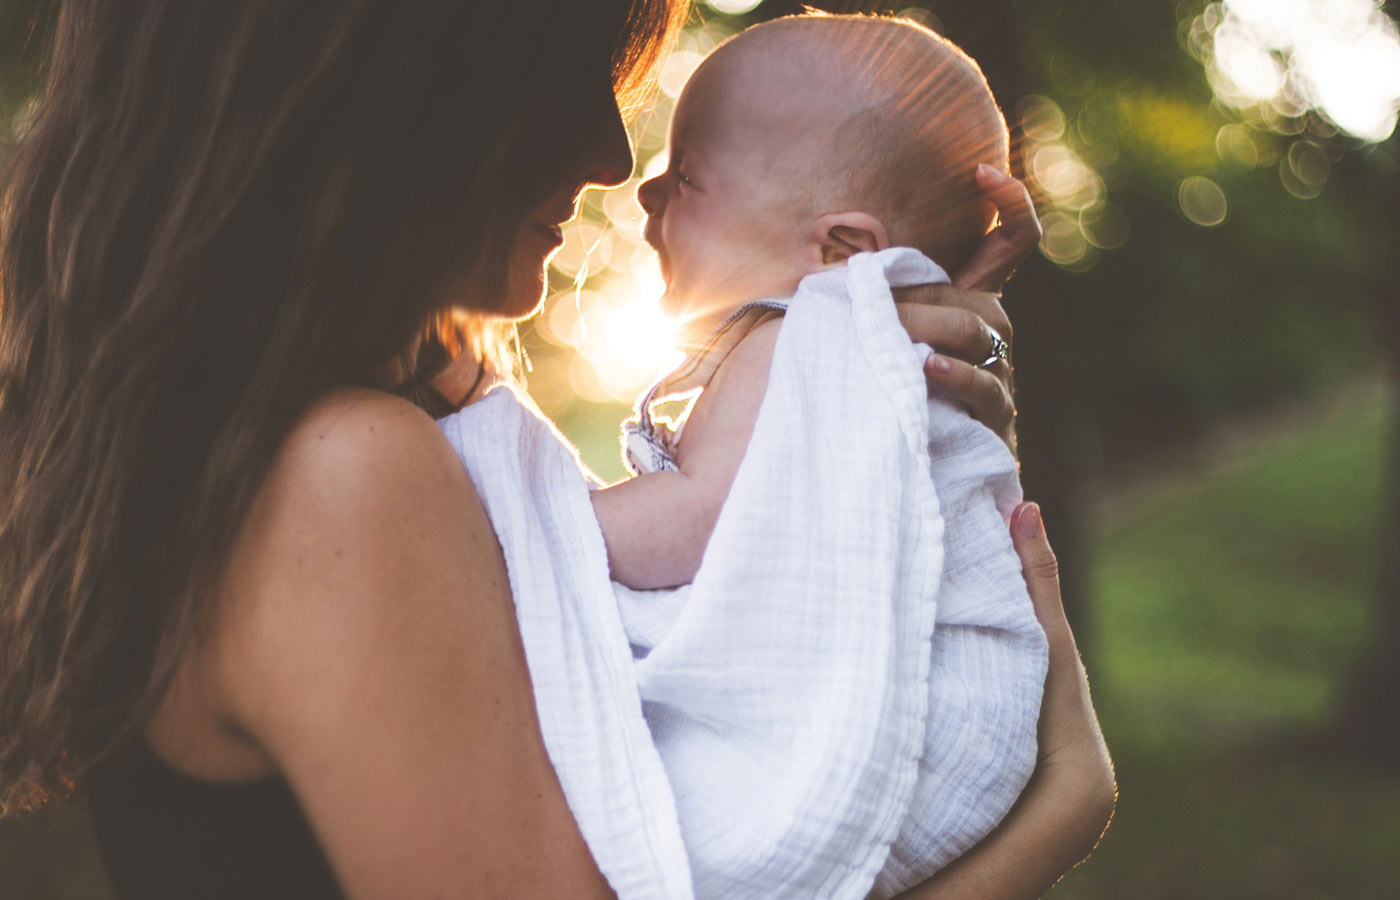 modernmamahypnobirthing-photo-of-a-mother-holding-her-baby-sunlight-outdoor